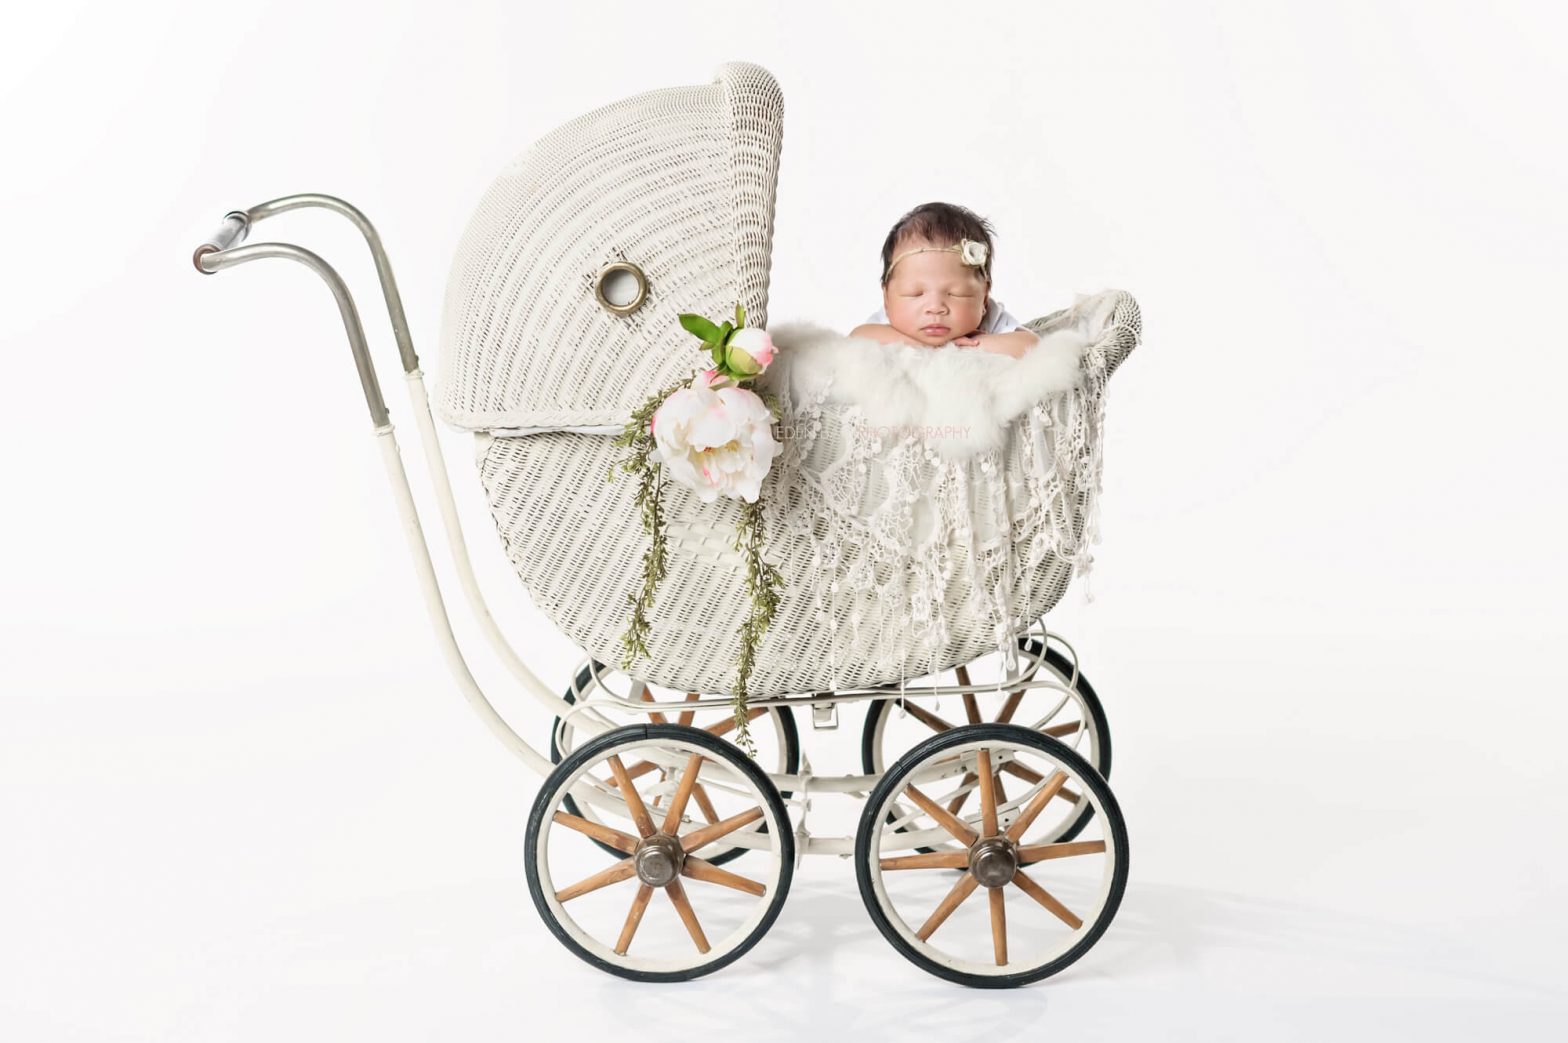 Baby Carriage Market